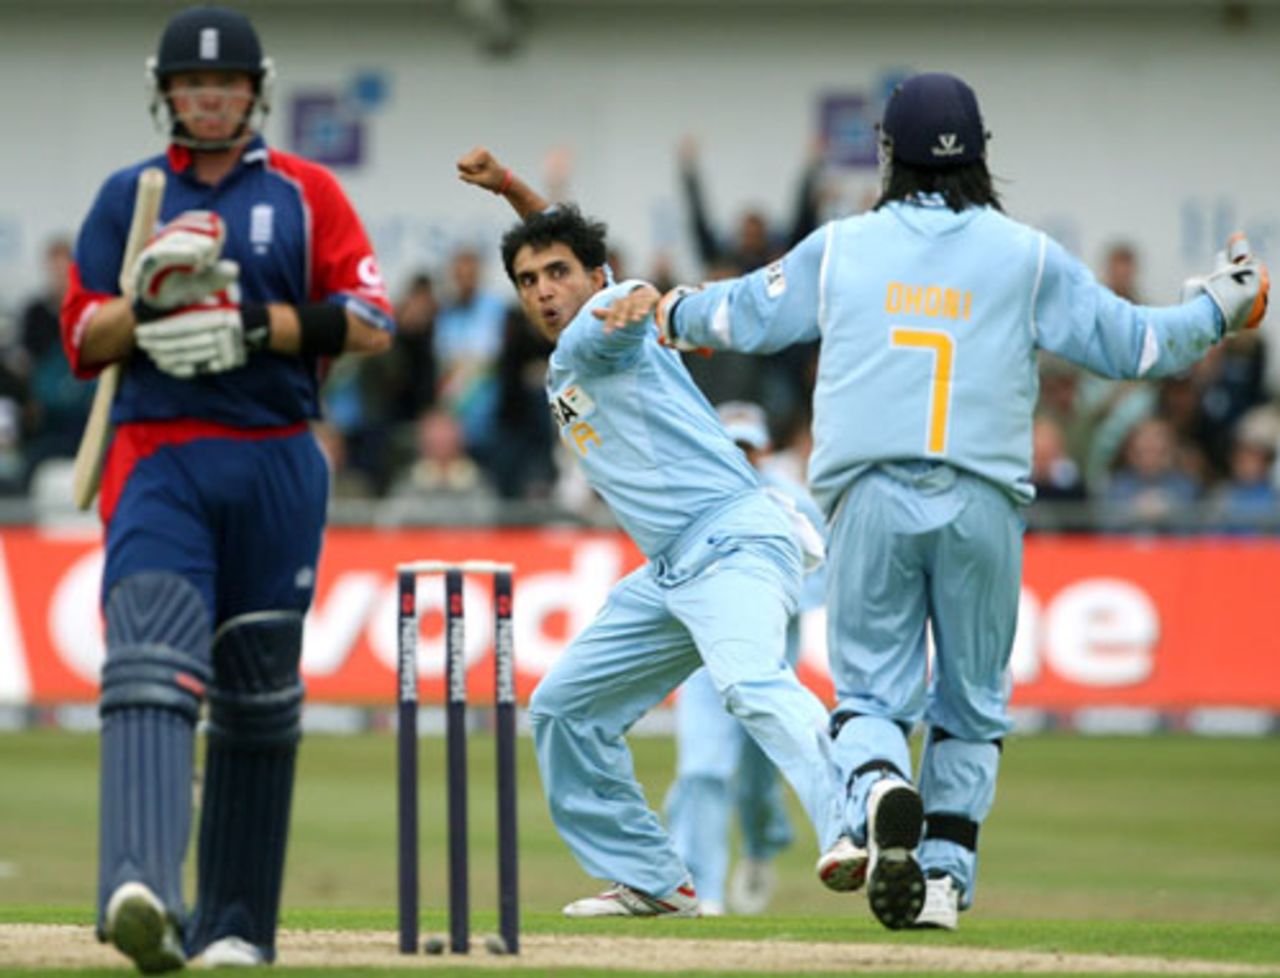 Saurav Ganguly whoops it up after nailing Ian Bell, England v India, 5th ODI, Headingley, September 2, 2007